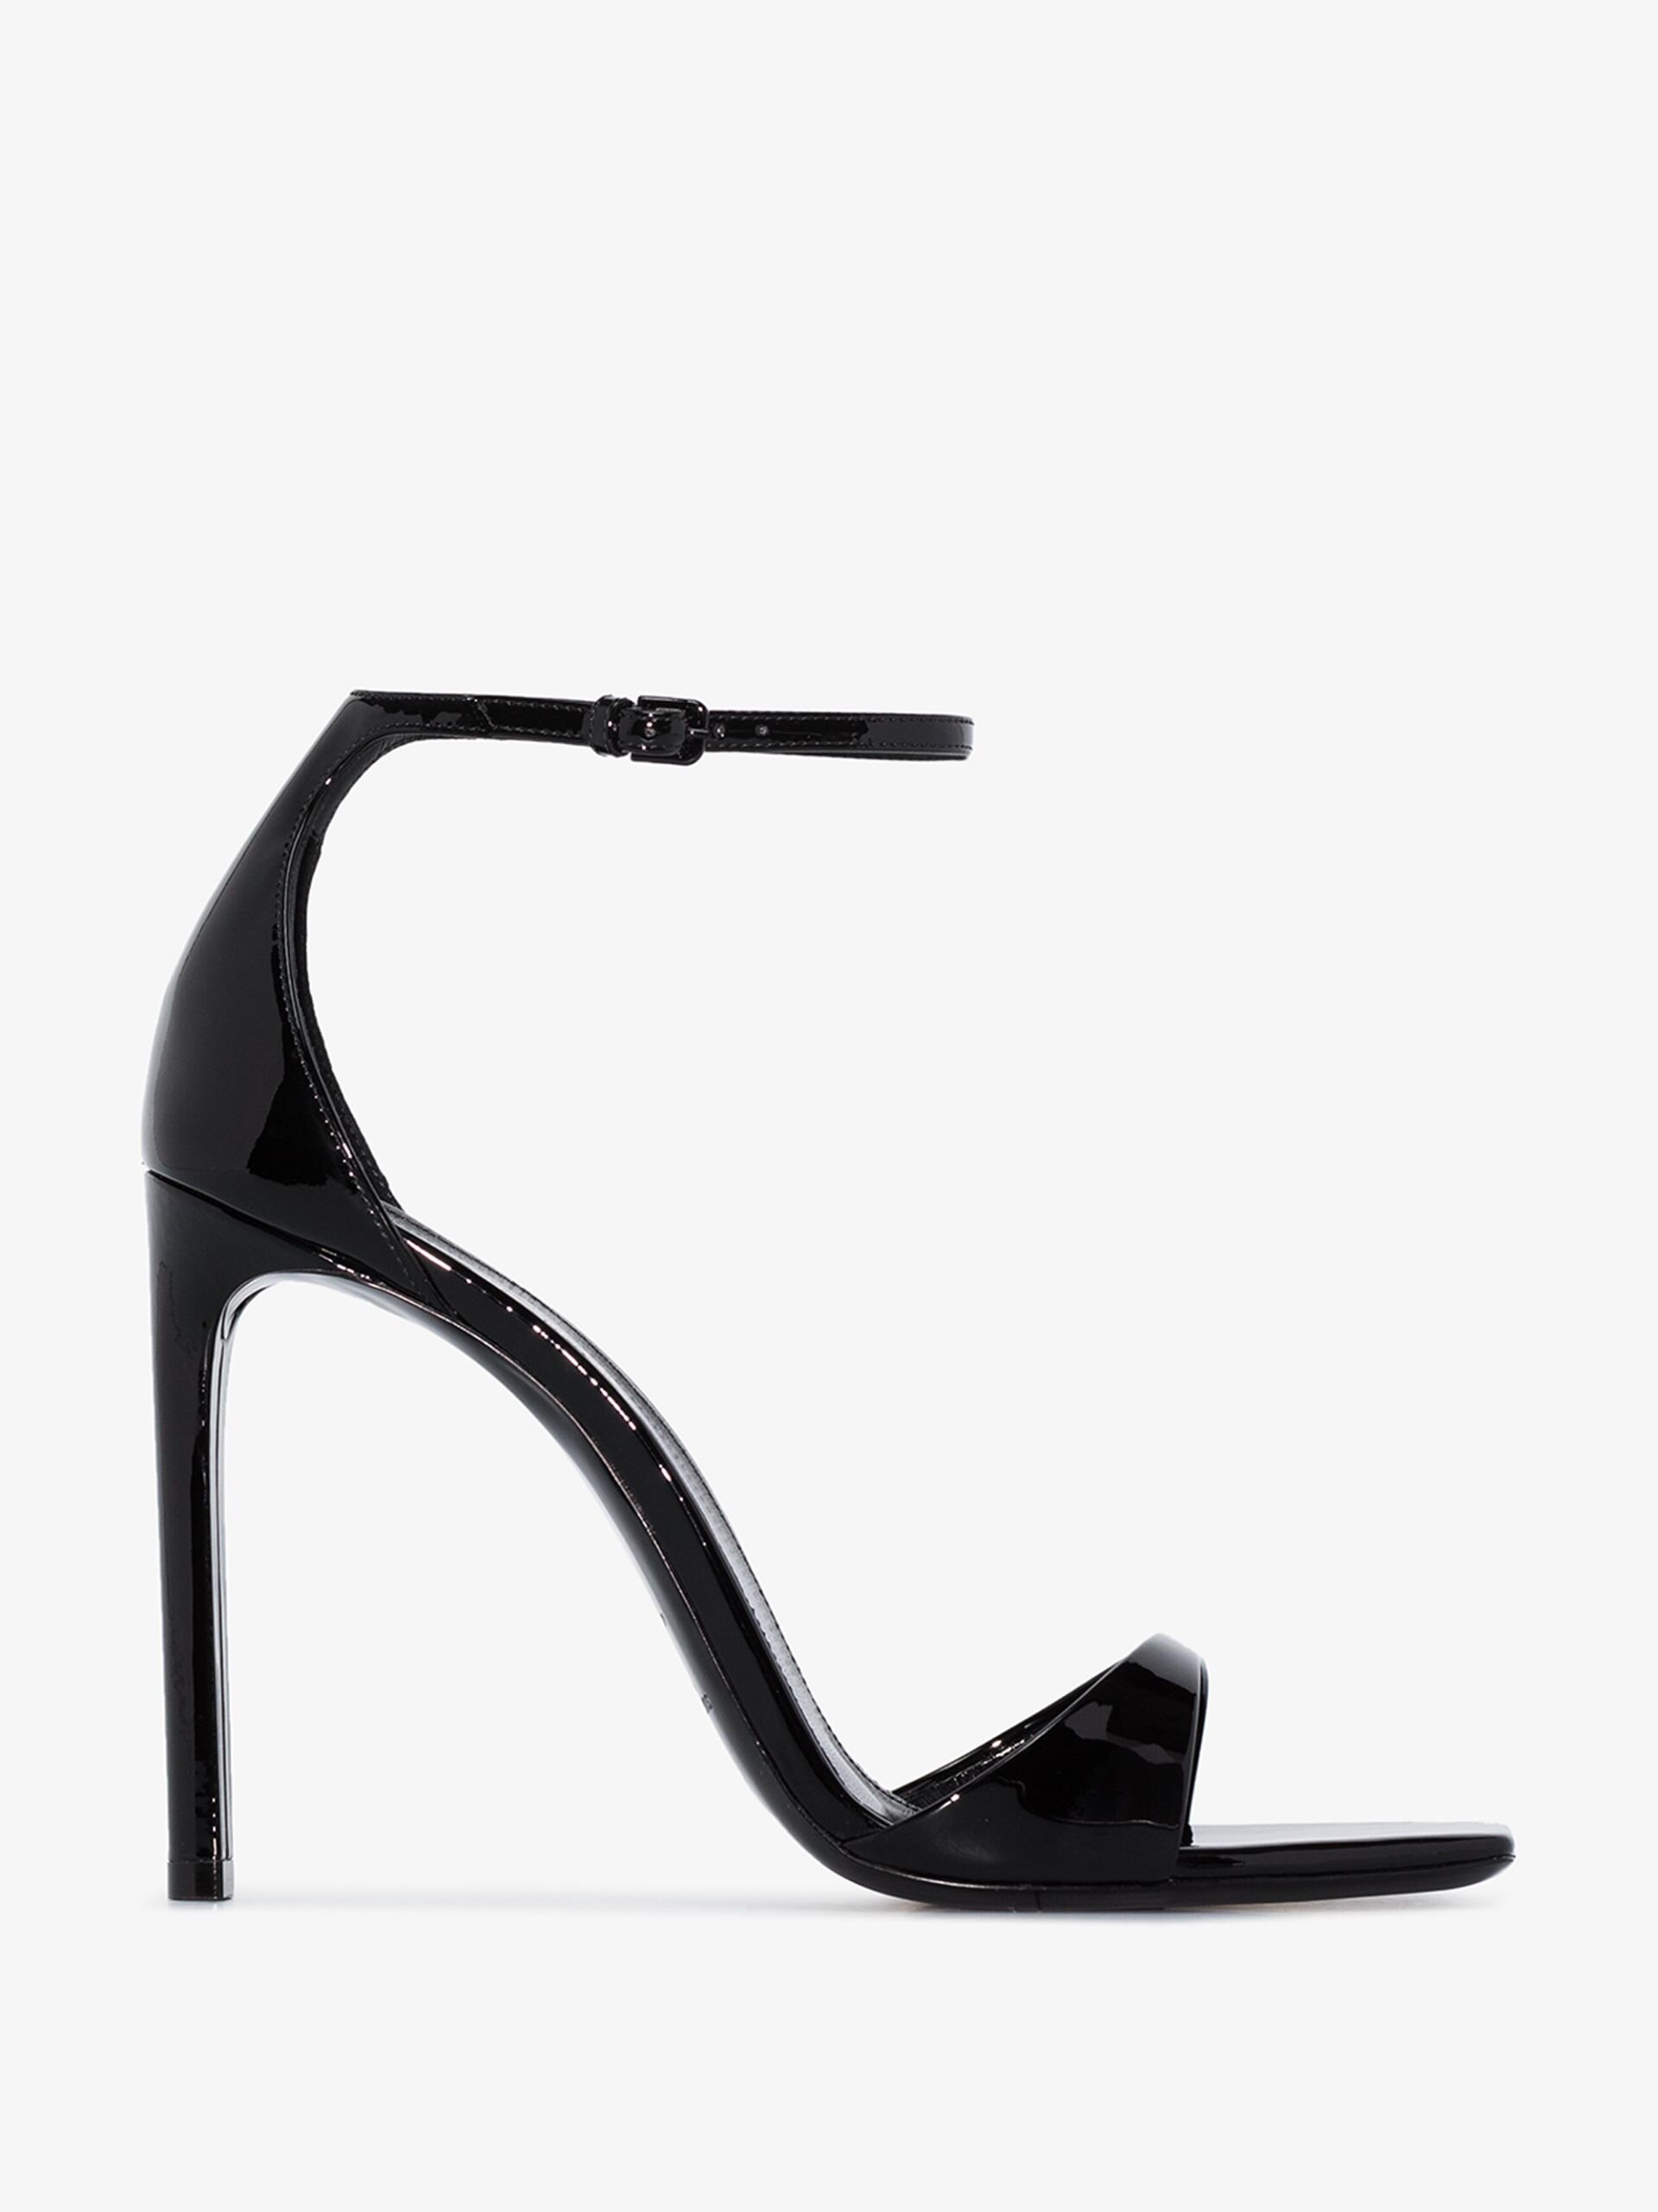 support Shilling Almighty Saint Laurent Bea Sandals in Black Patent Leather — UFO No More